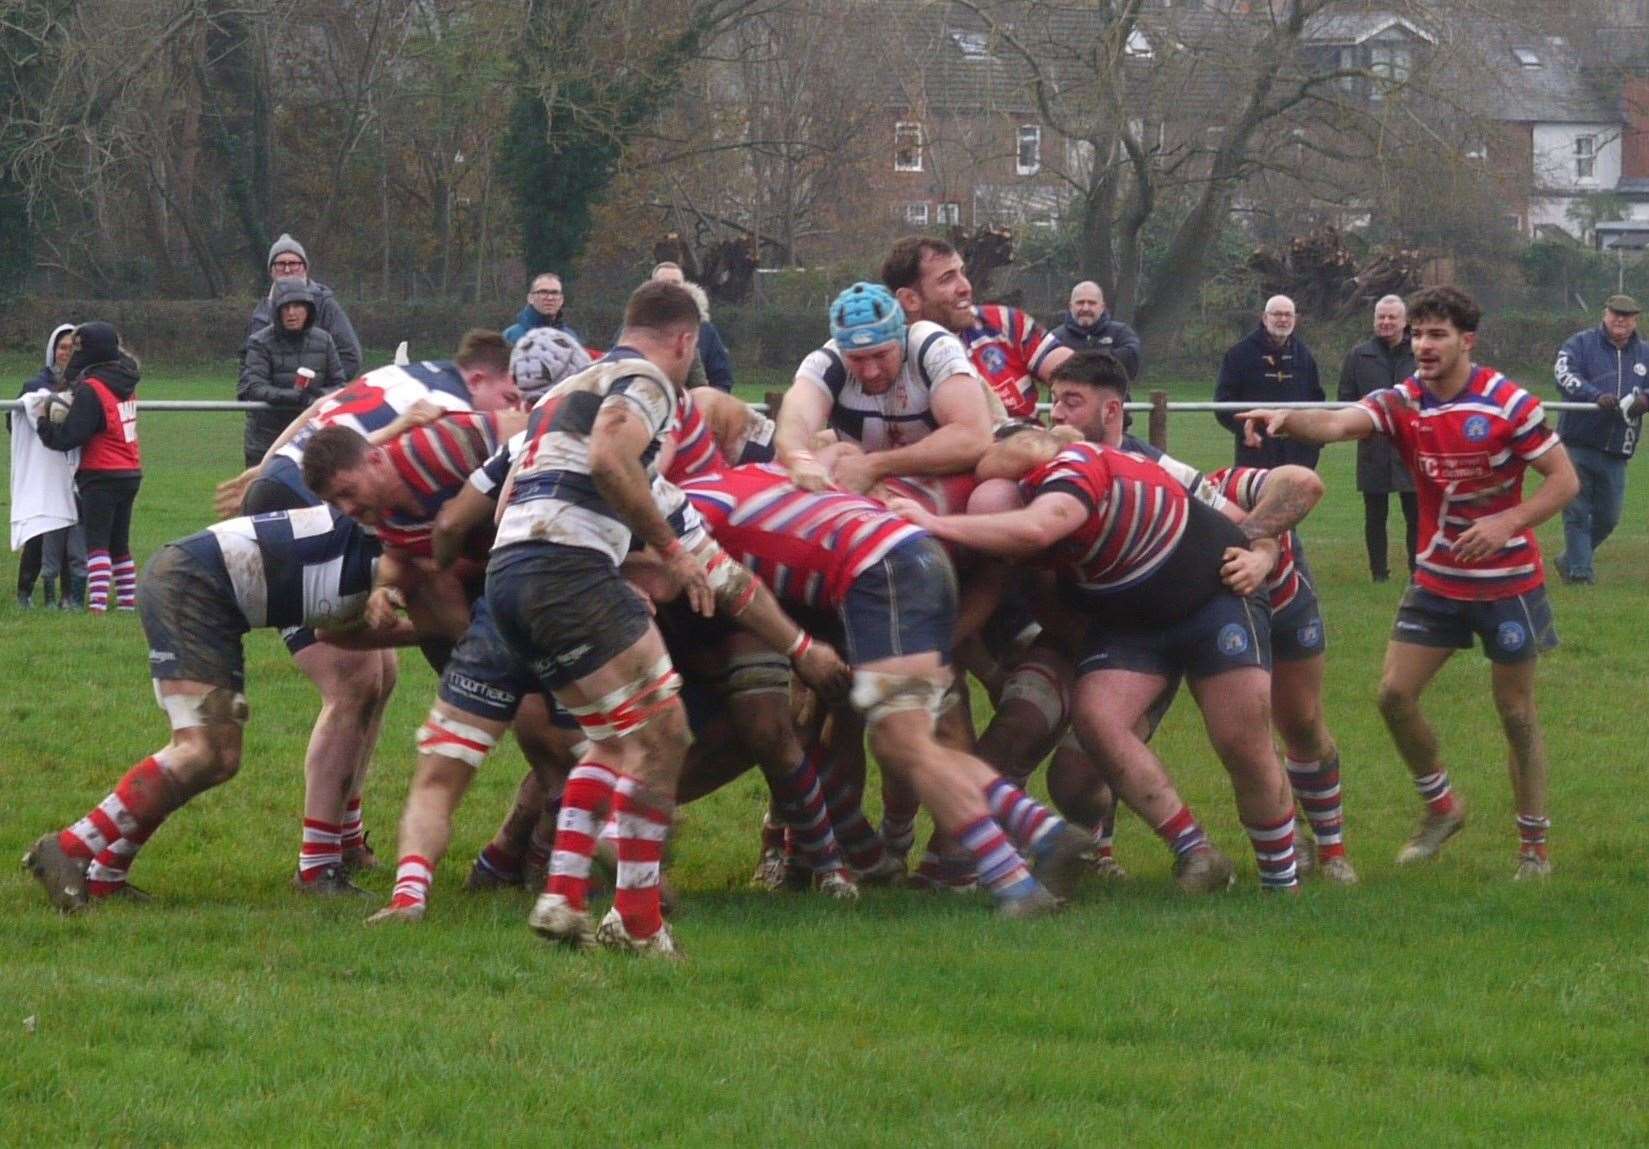 TJs took maximum points with their comeback victory over Dorking at the The Slade.